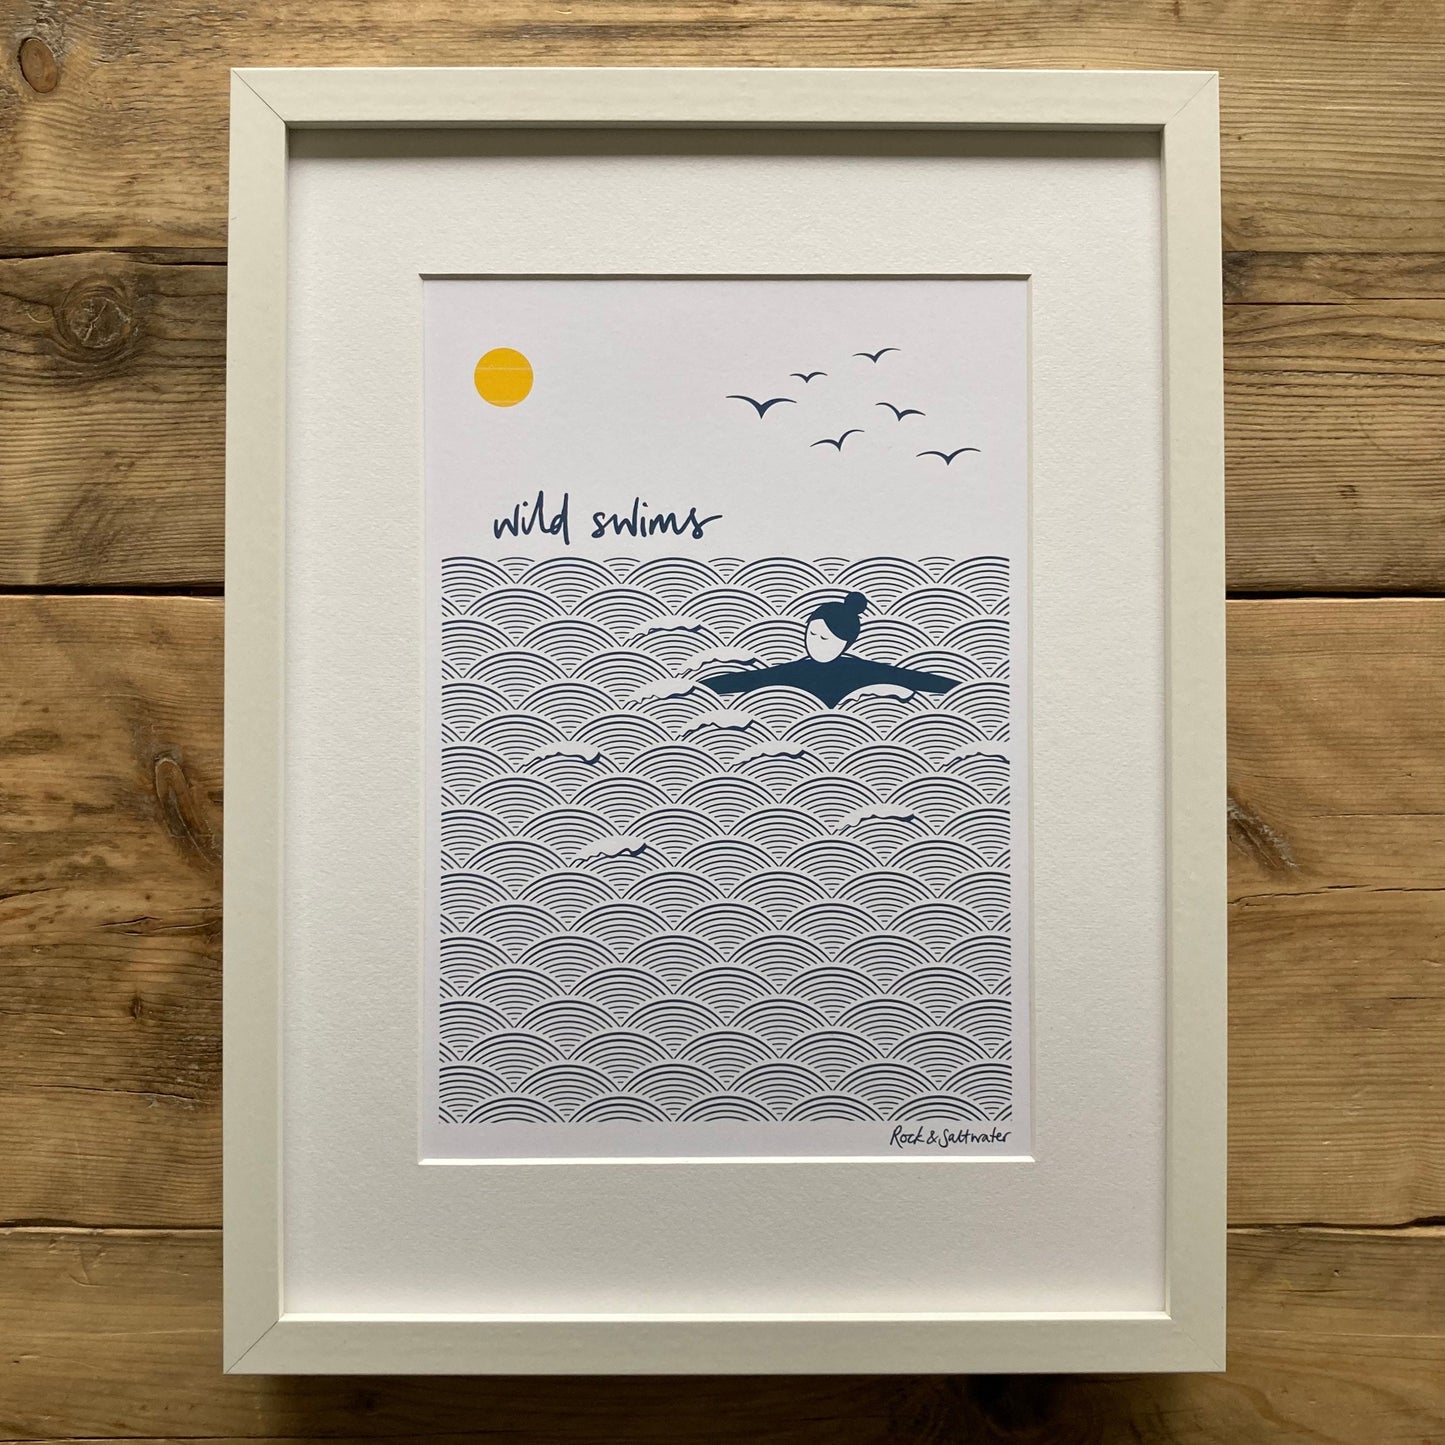 Slight seconds | Wild swims art print, unframed | A5 and A4 sizes available